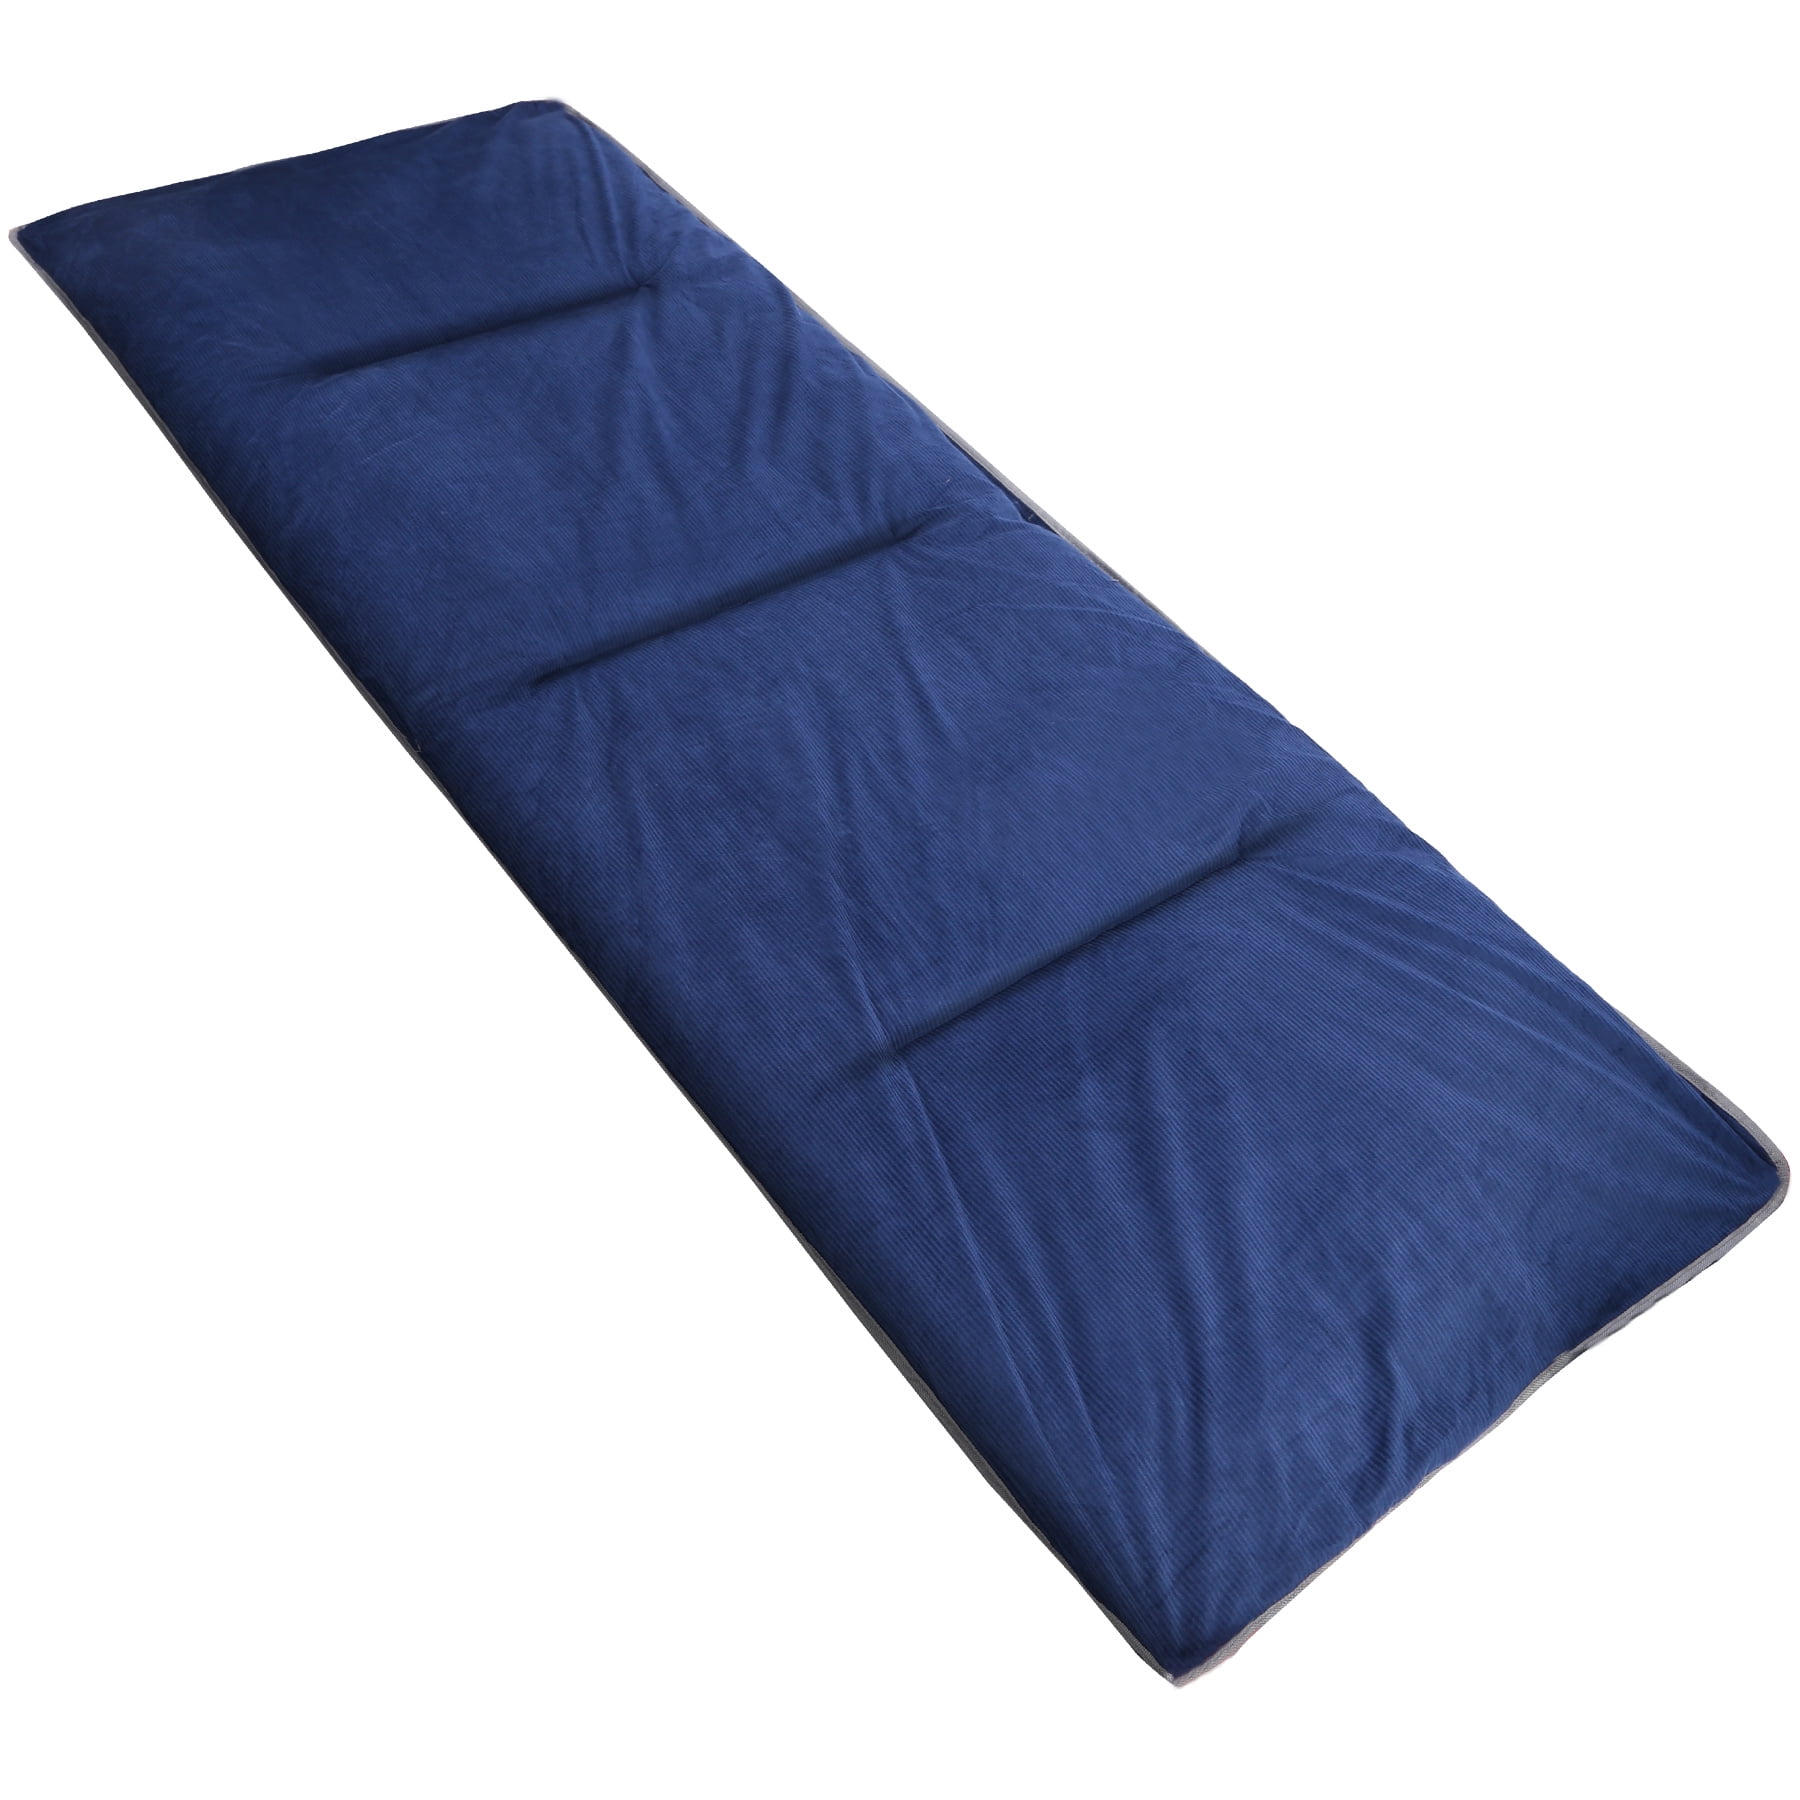 REDCAMP XL Cot Pads for Camping Soft Comfortable Cotton Thin Sleeping Cot Mattress Pad 75x28 Brown Grey and Navy Blue 